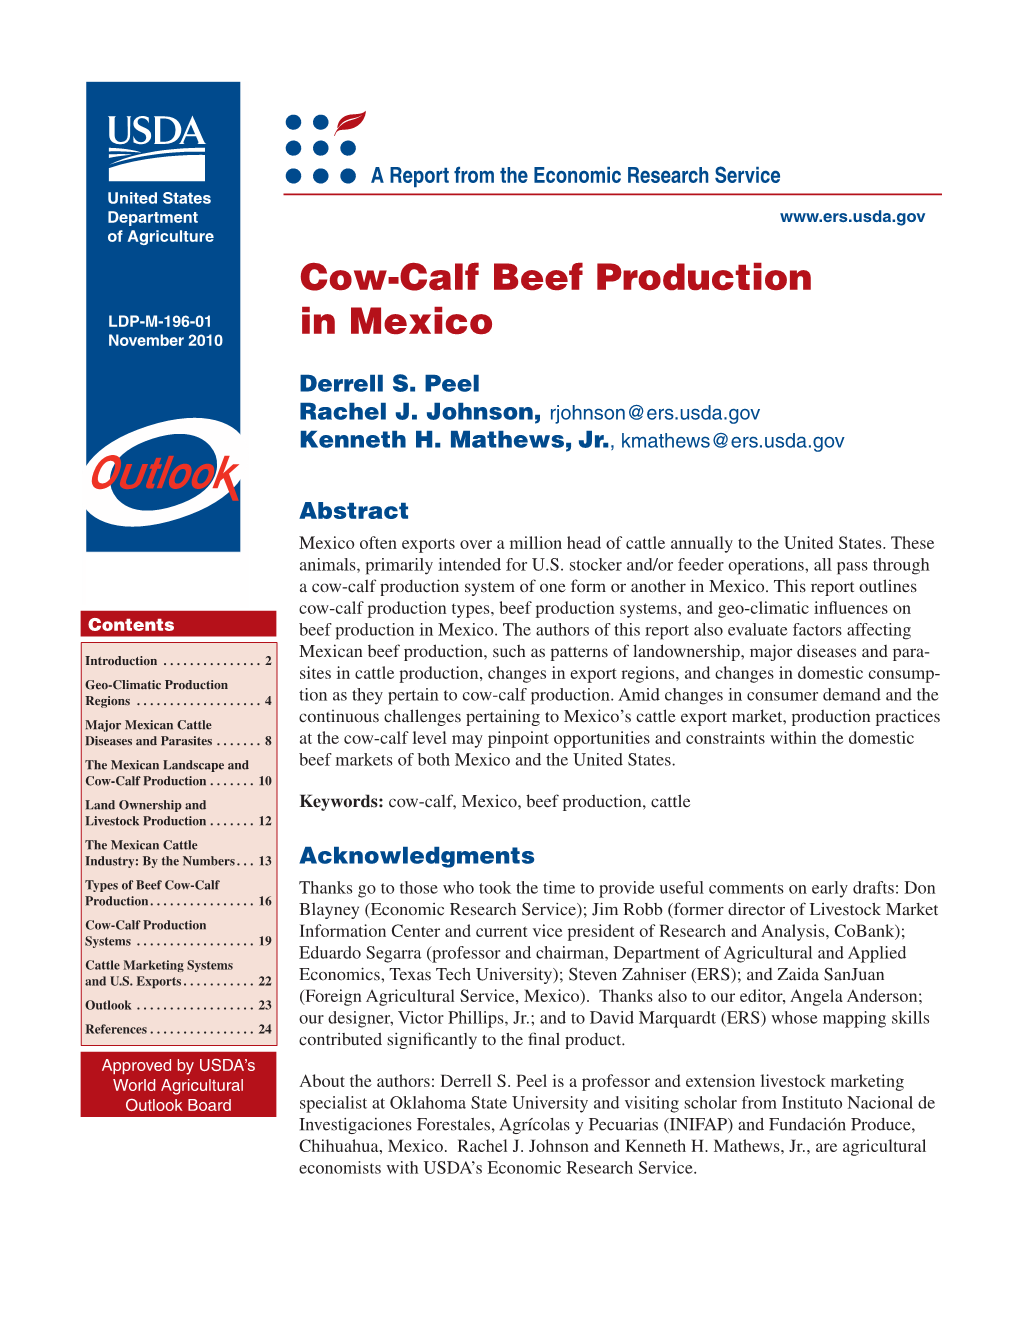 Cow-Calf Beef Production in Mexico